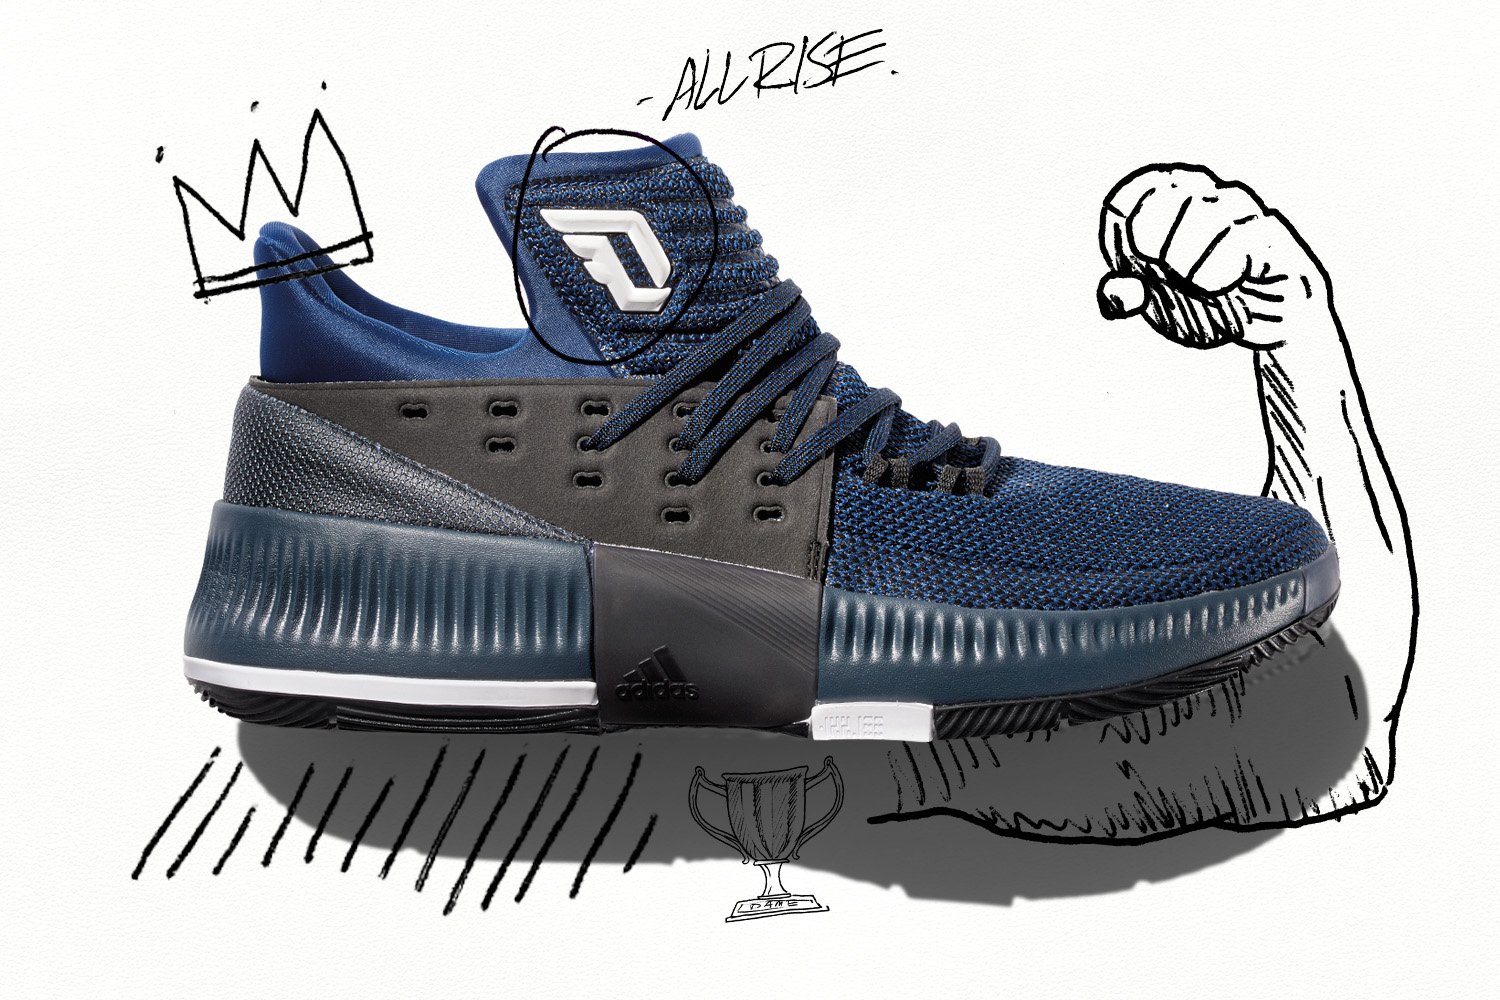 adidas Dame 3 "By Any Means"